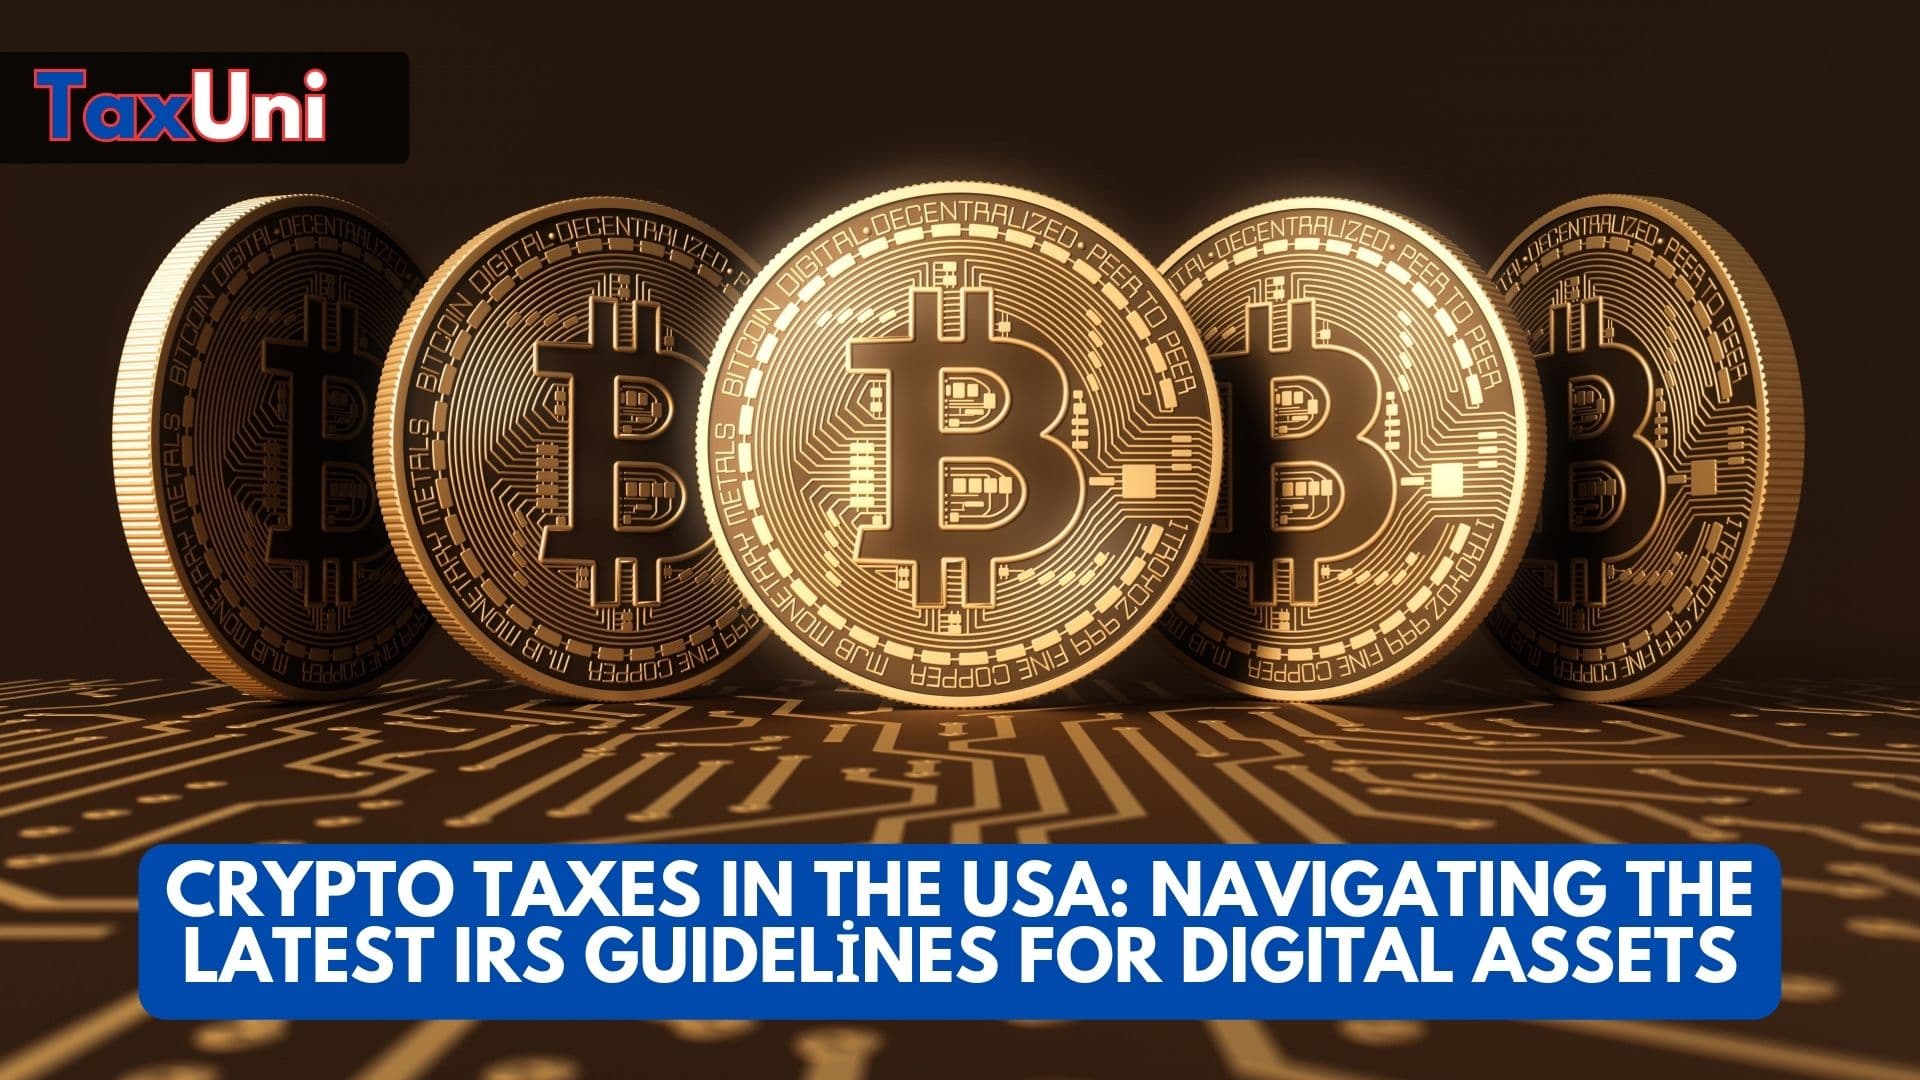 Crypto Taxes in the USA Navigating the Latest IRS Guidelines for Digital Assets